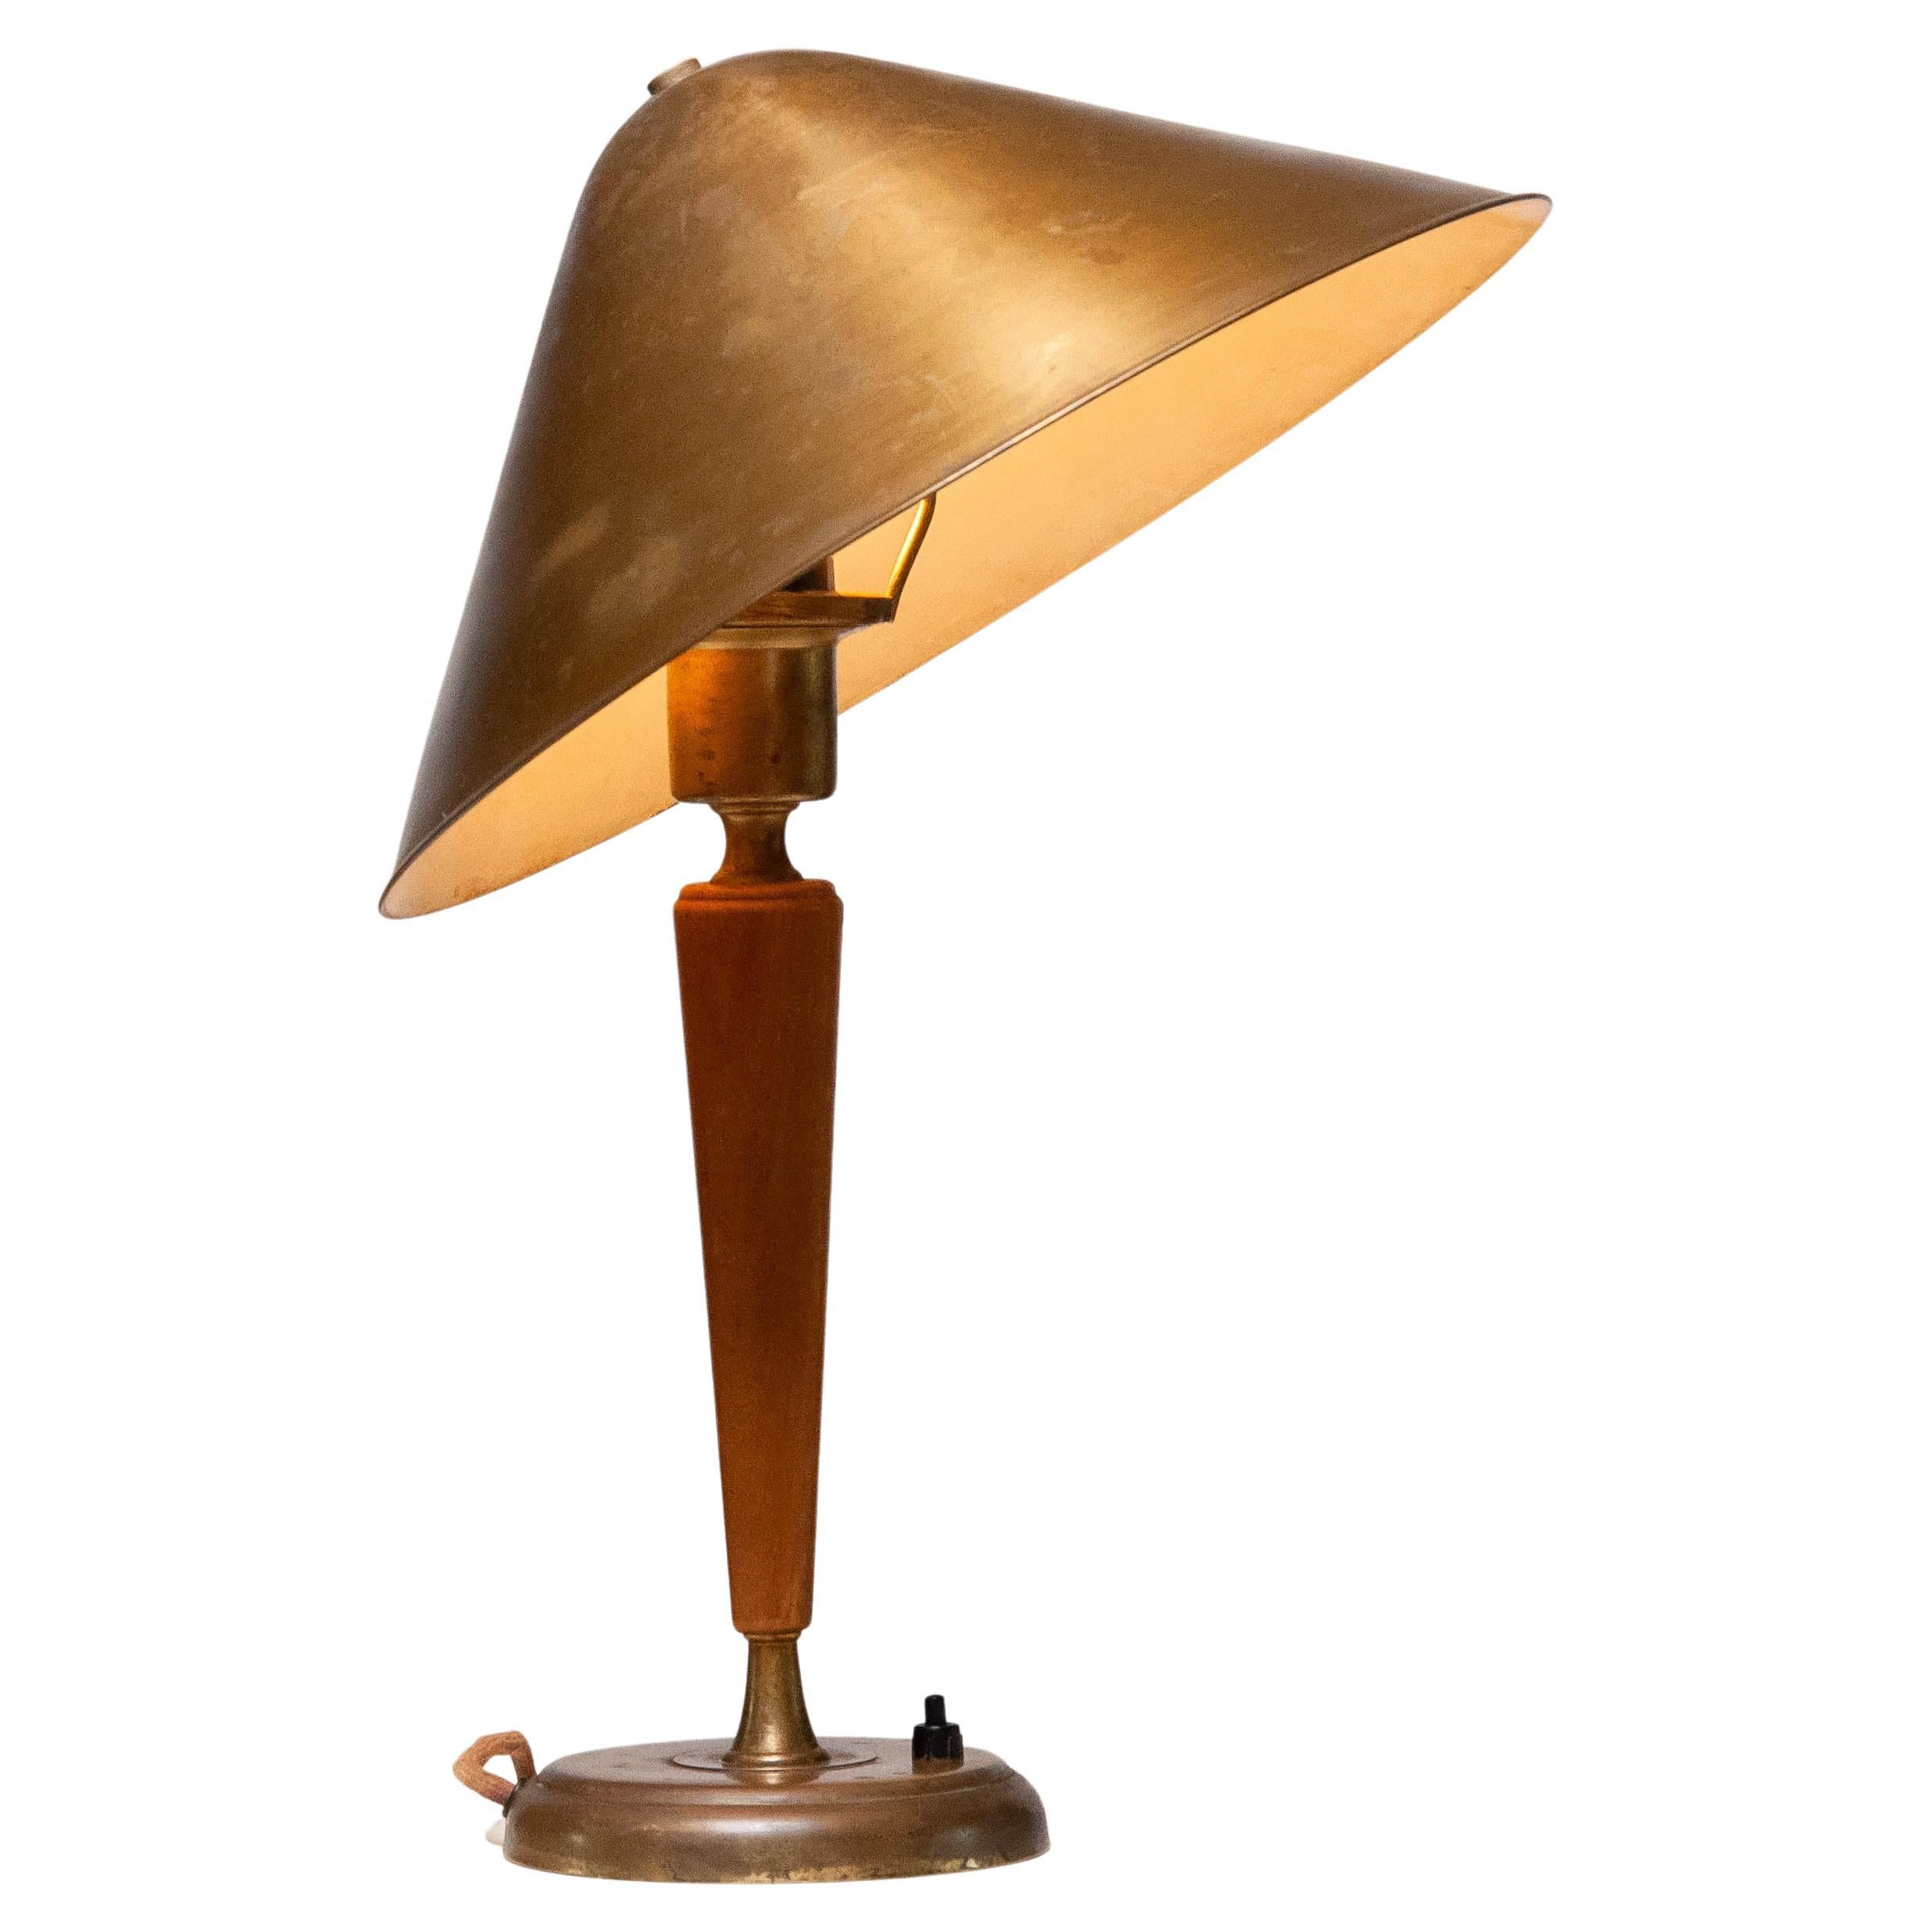 1940's Brass and Elm Table Lamp Designed by Harald Elof Notini for Böhlmarks